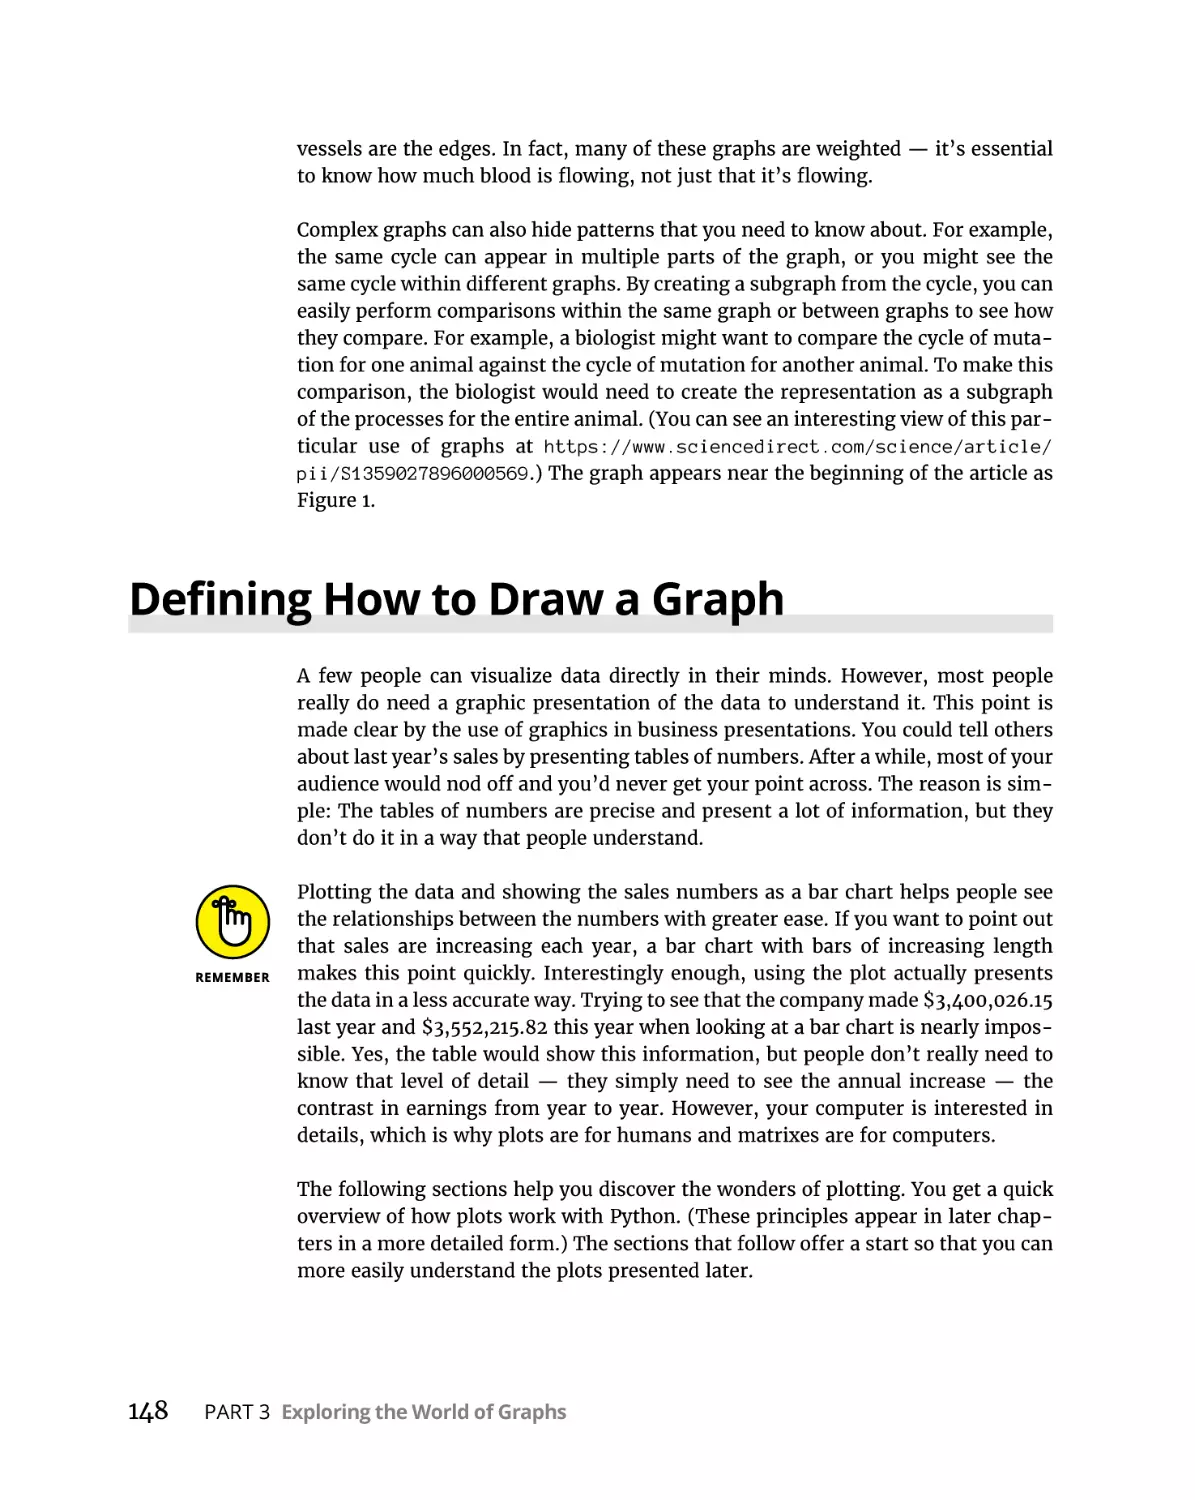 Defining How to Draw a Graph